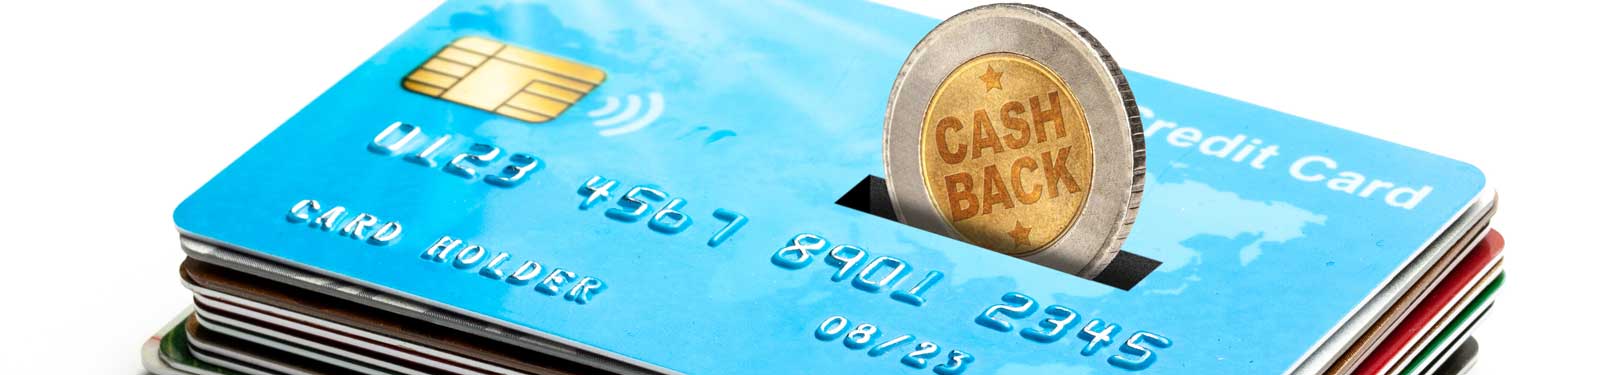 Find out more about credit card rewards and how they work.